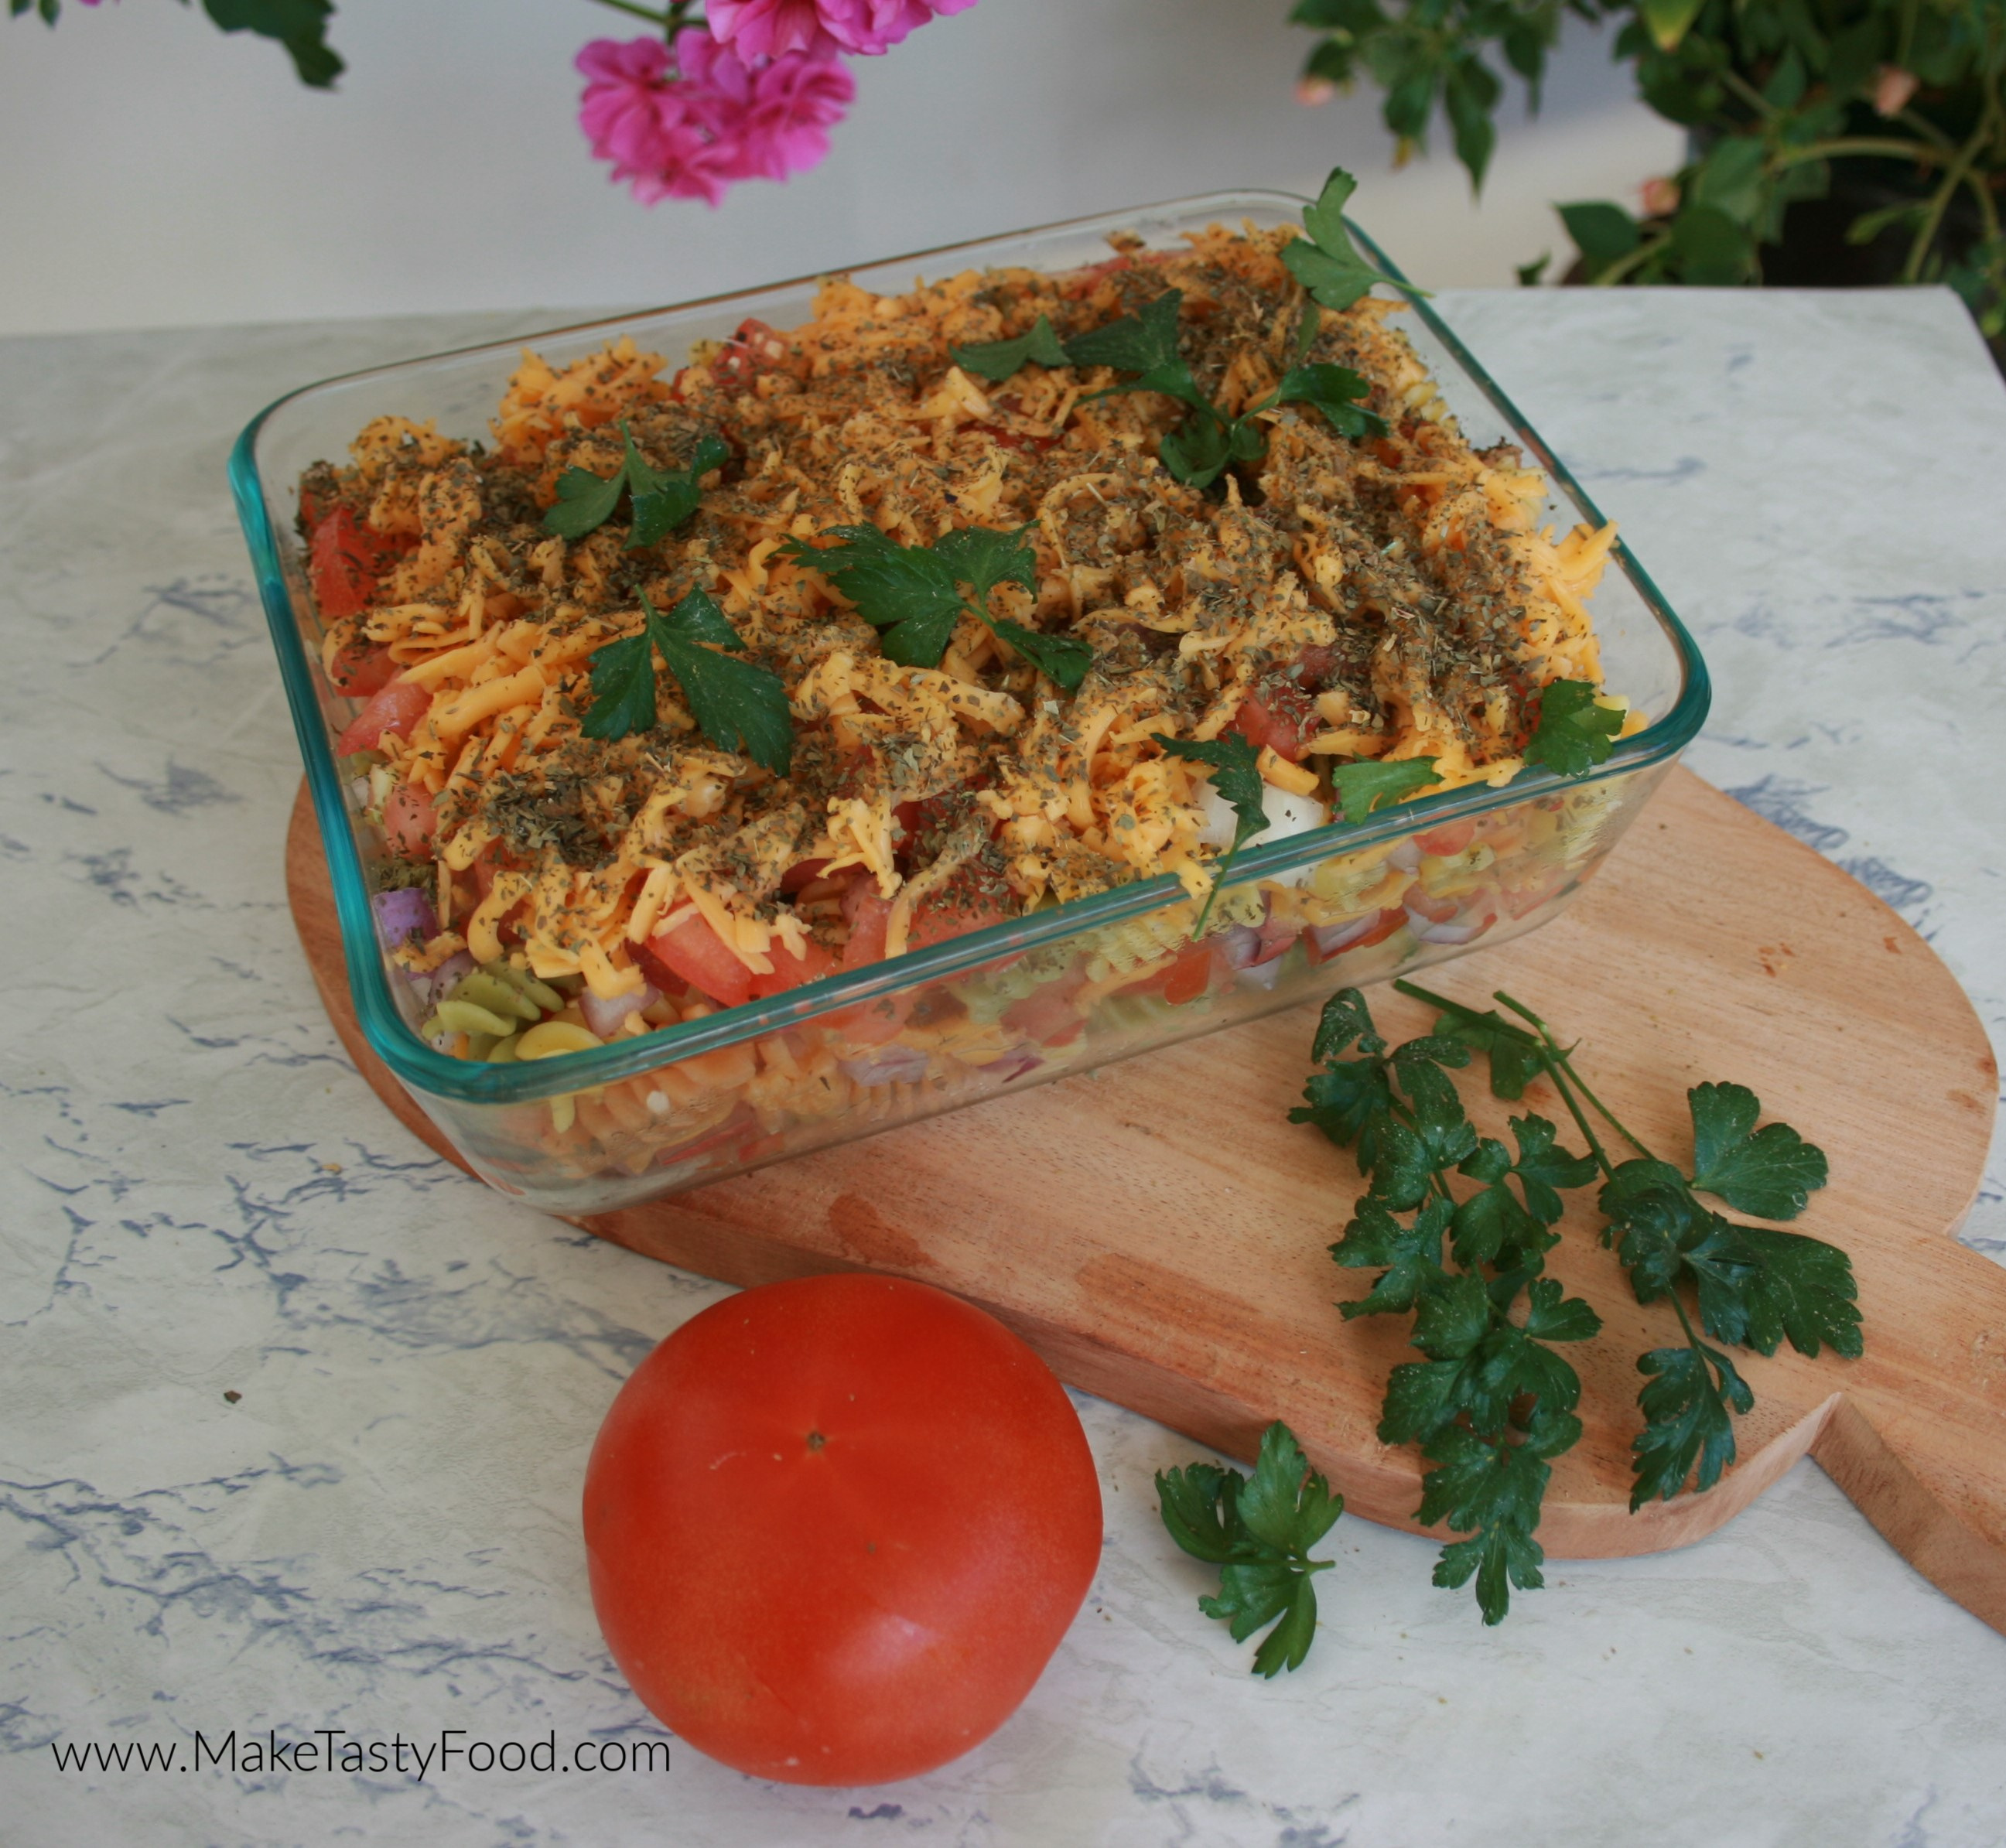 The dish layered with pasta and tomato and cheese ready to have the egg and milk poured in.